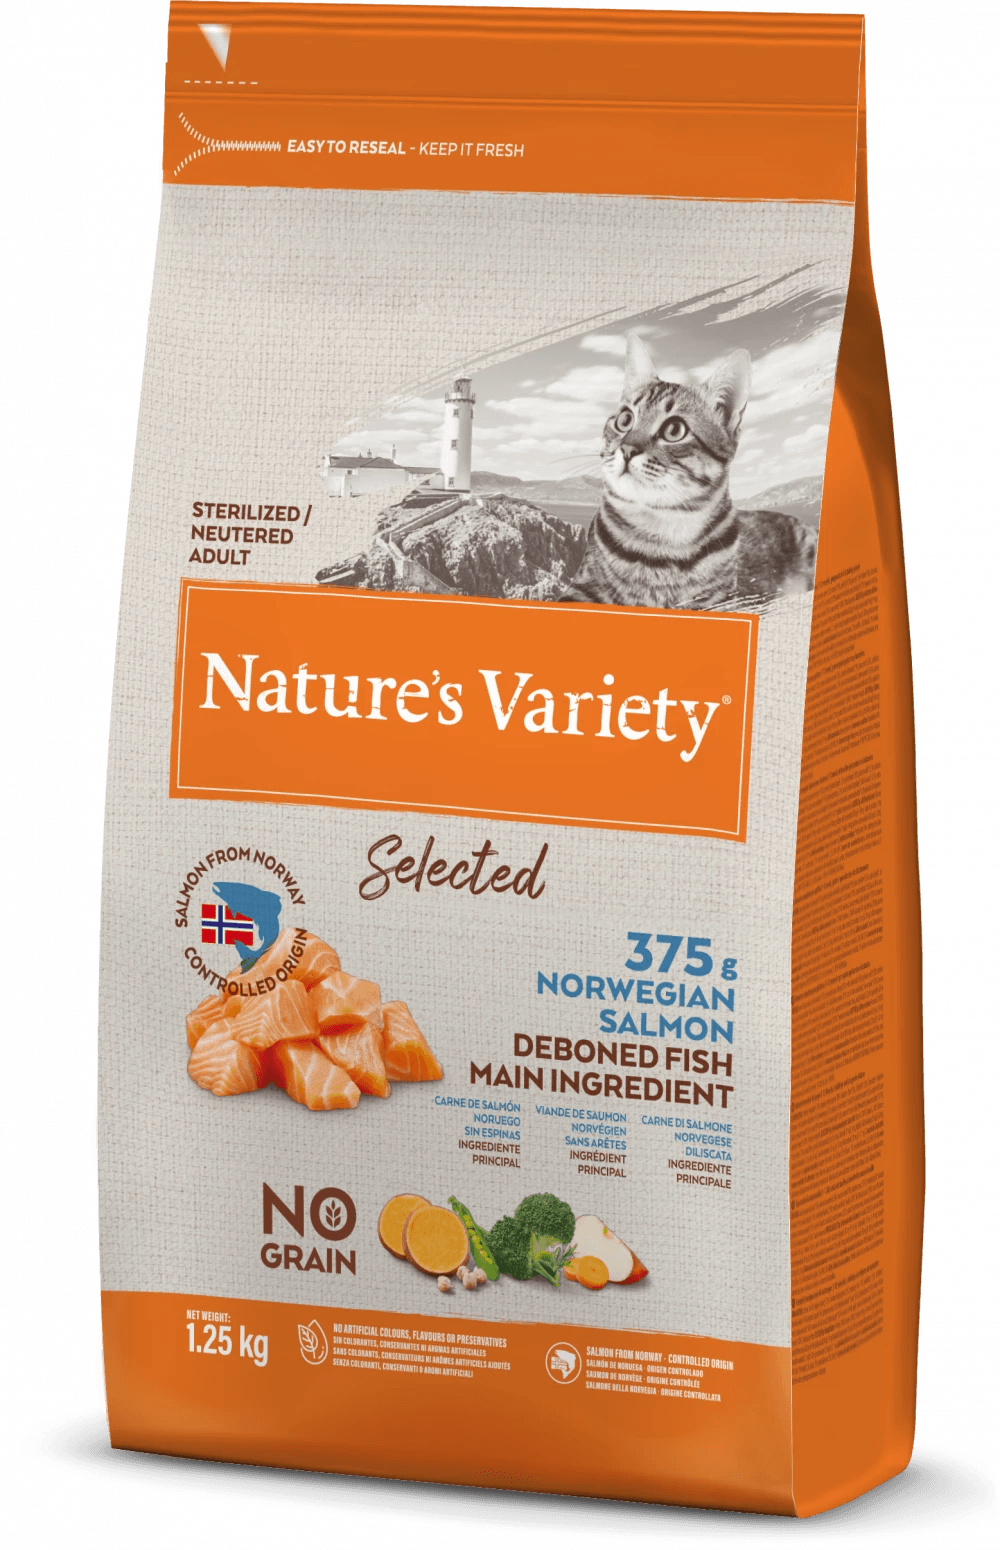 Nature's Variety - SELECTED DRY NORWEGIAN SALMON FOR ADULT CATS 1.25kg - North East Pet Shop Nature's Variety